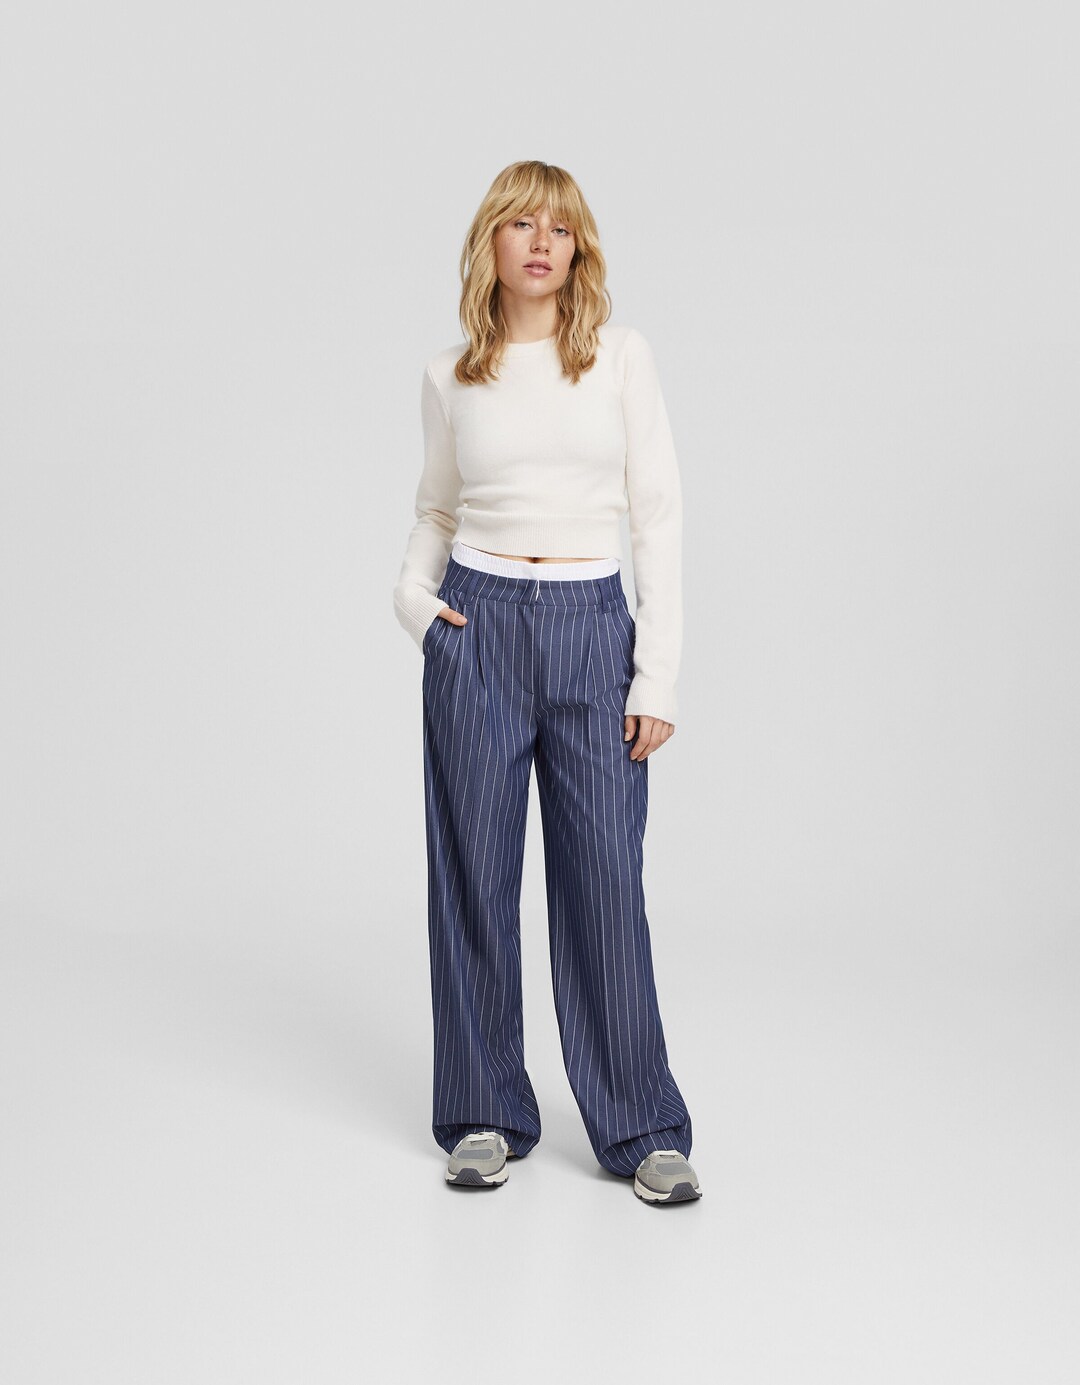 Tailored trousers with underwear